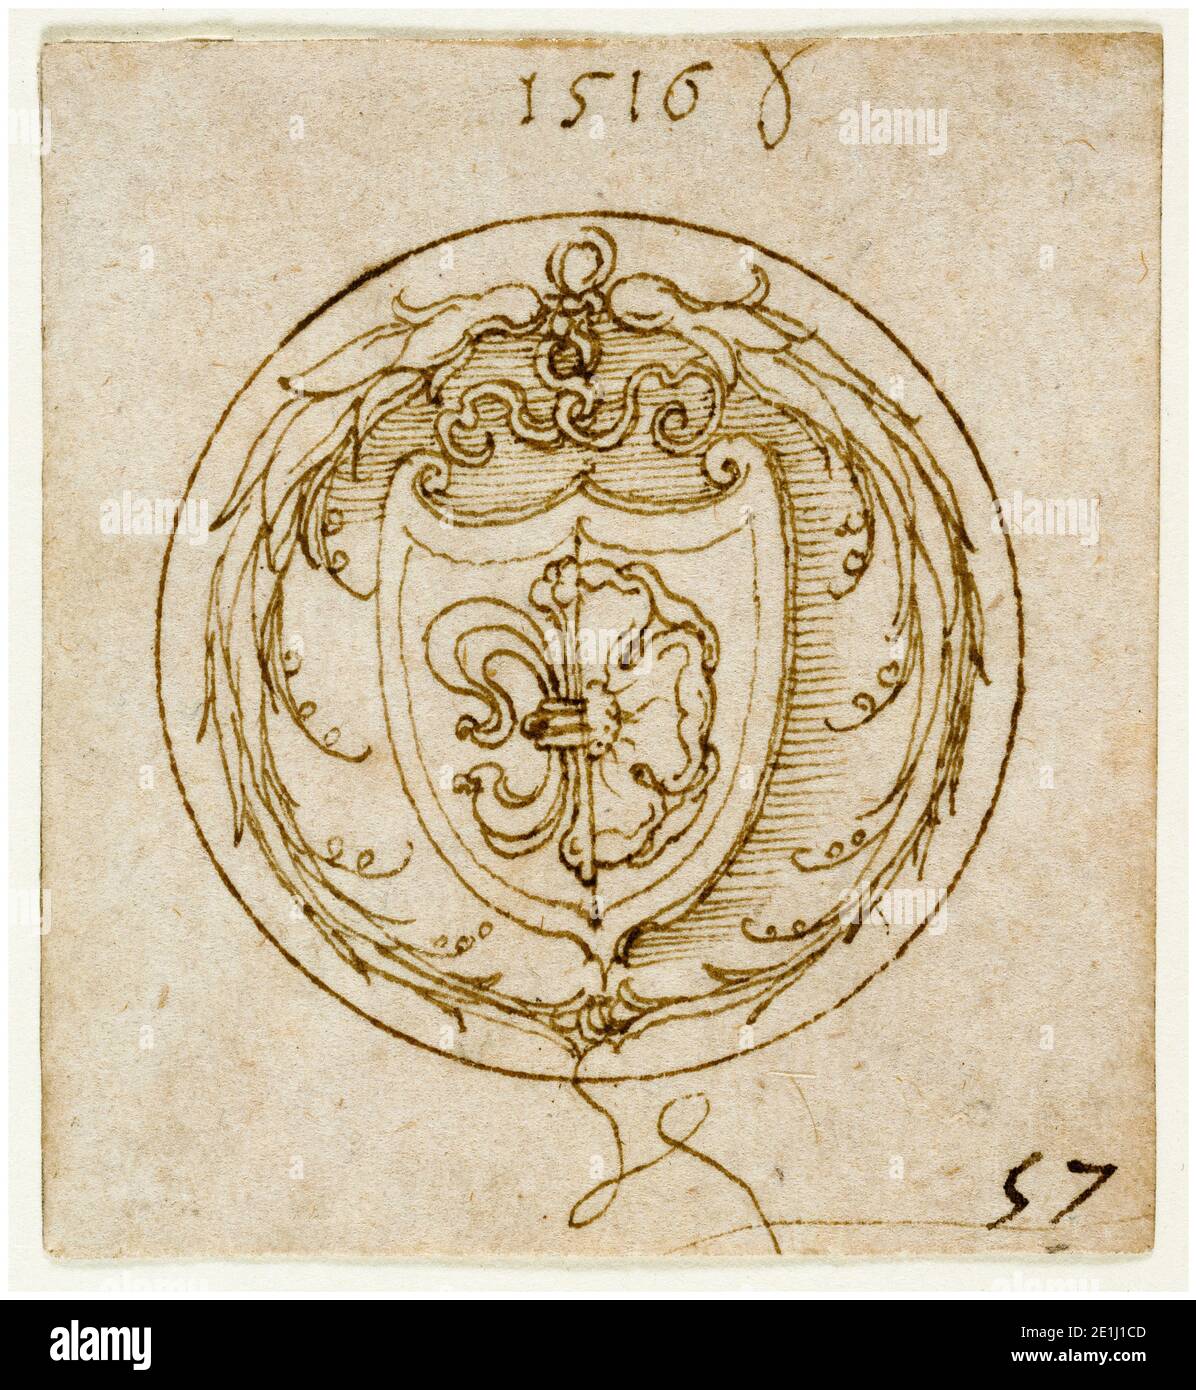 Albrecht Dürer, Design for an Ornament or Signet Ring with the Arms of Lazarus Spengler, drawing, 1516 Stock Photo